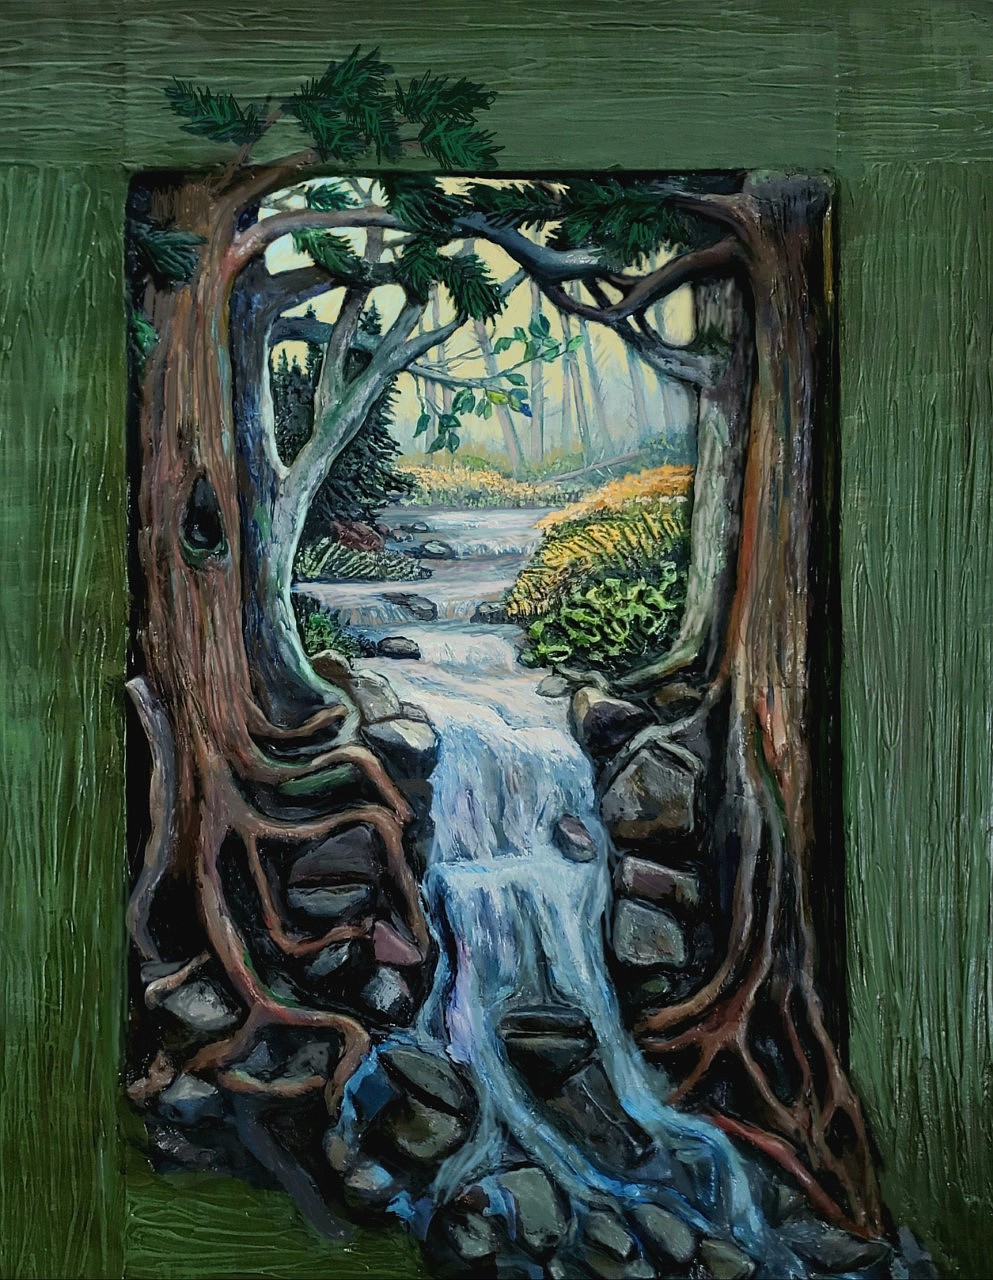 Karli Martinson's 3-D art is so popular it often sells just as she finishes it, as with this one, "Whispering Waters." (Courtesy of Karli Martinson)